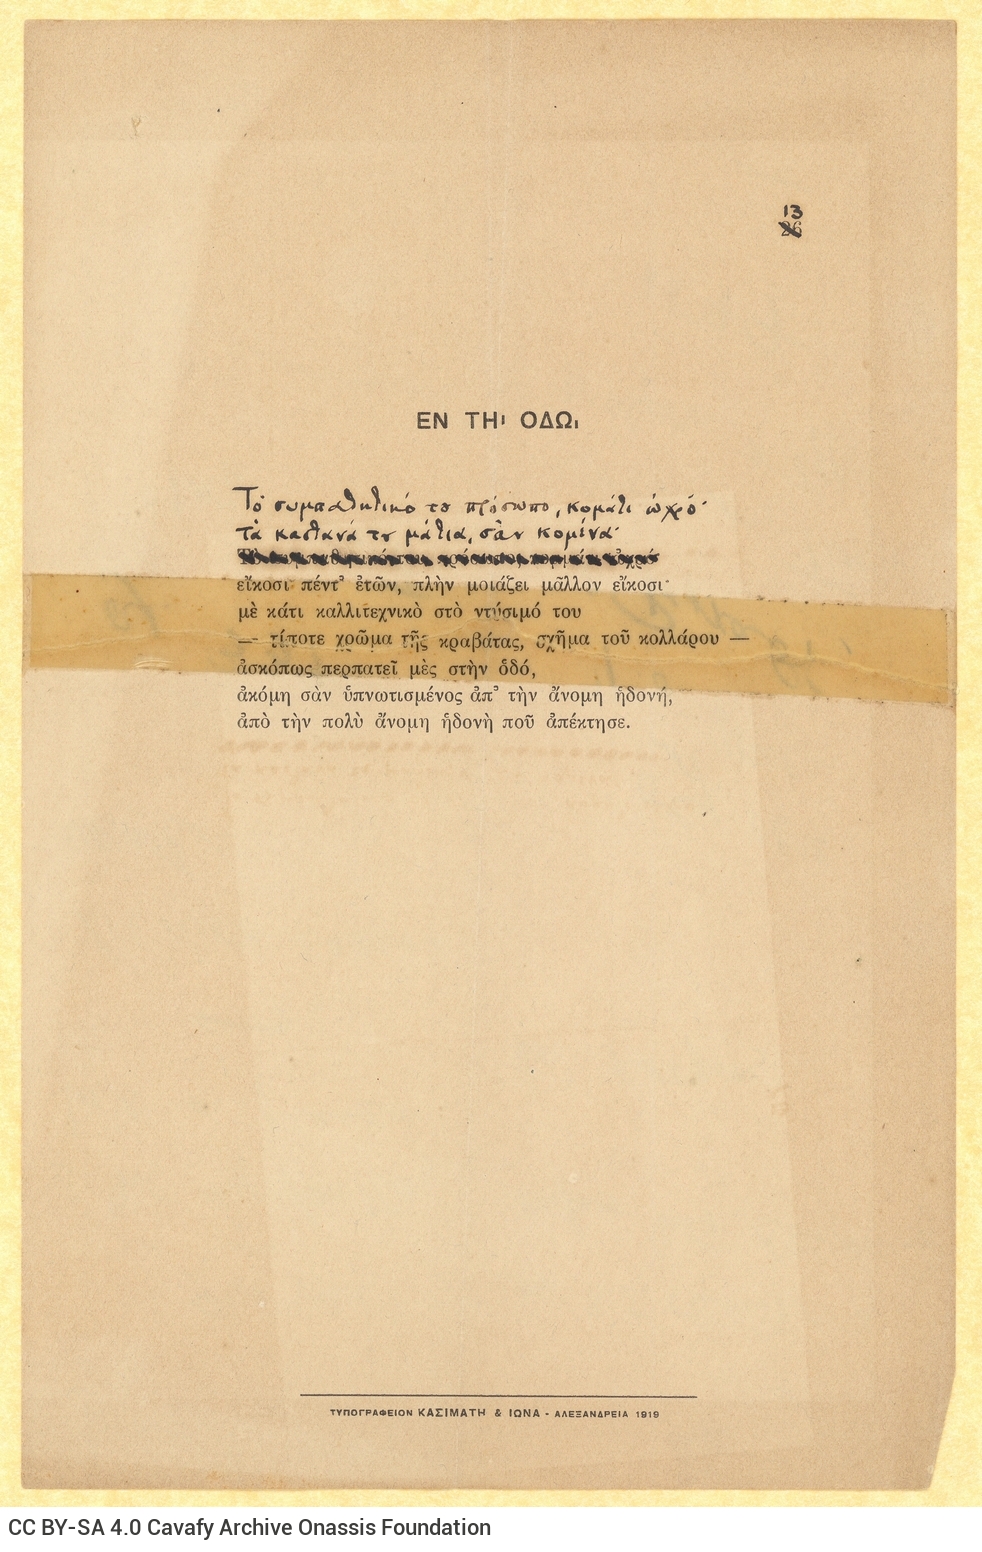 Printed broadsheet with the poem "In the Street" on the recto. The page numbering has been corrected by hand from 26 to 13